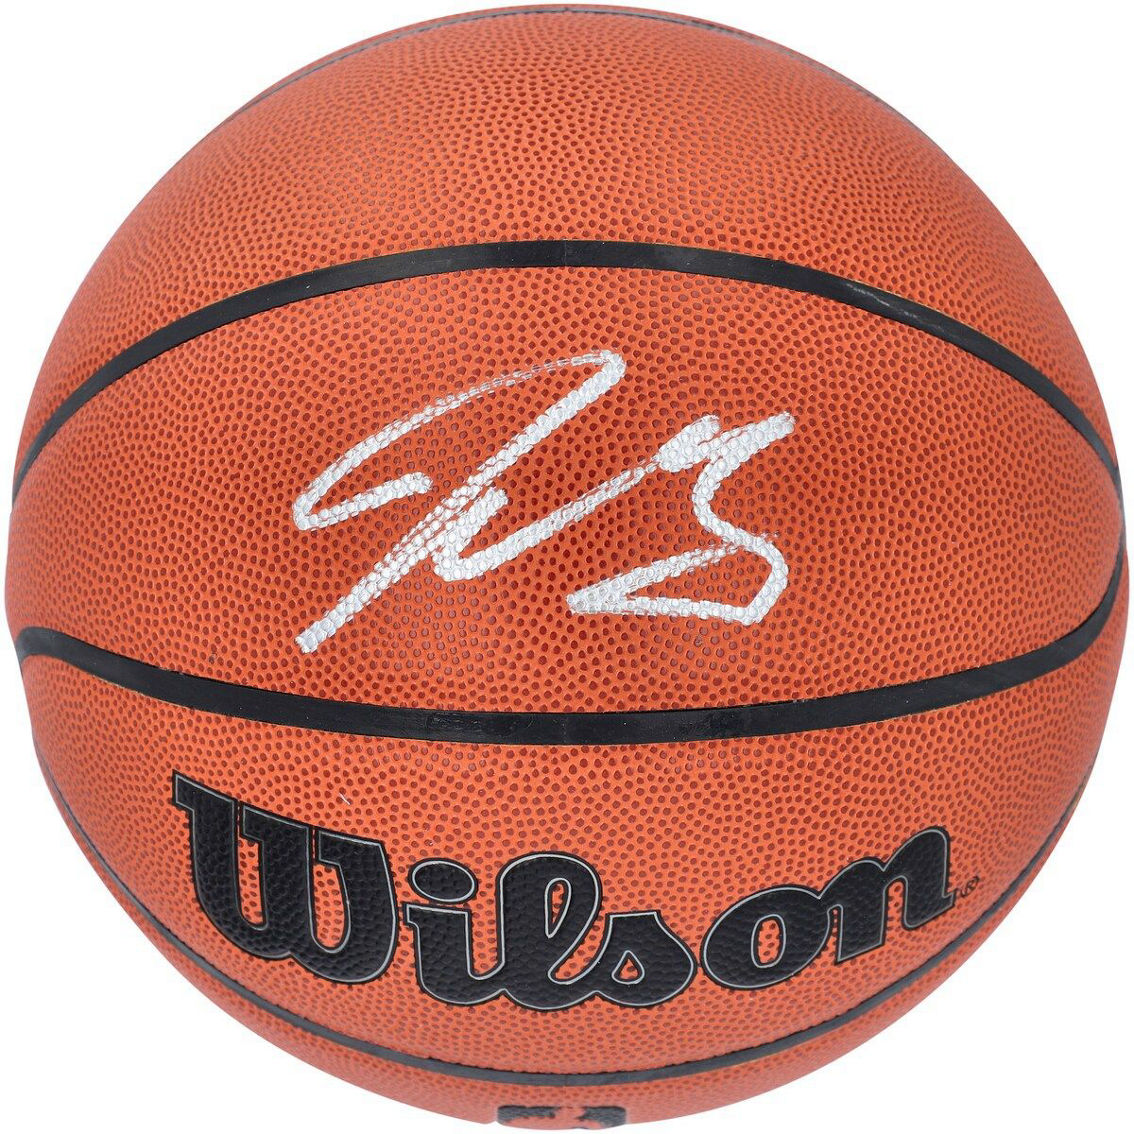 Fanatics Authentic Jamal Murray Denver Nuggets Autographed Wilson Authentic Series Indoor/Outdoor Basketball - Image 2 of 3